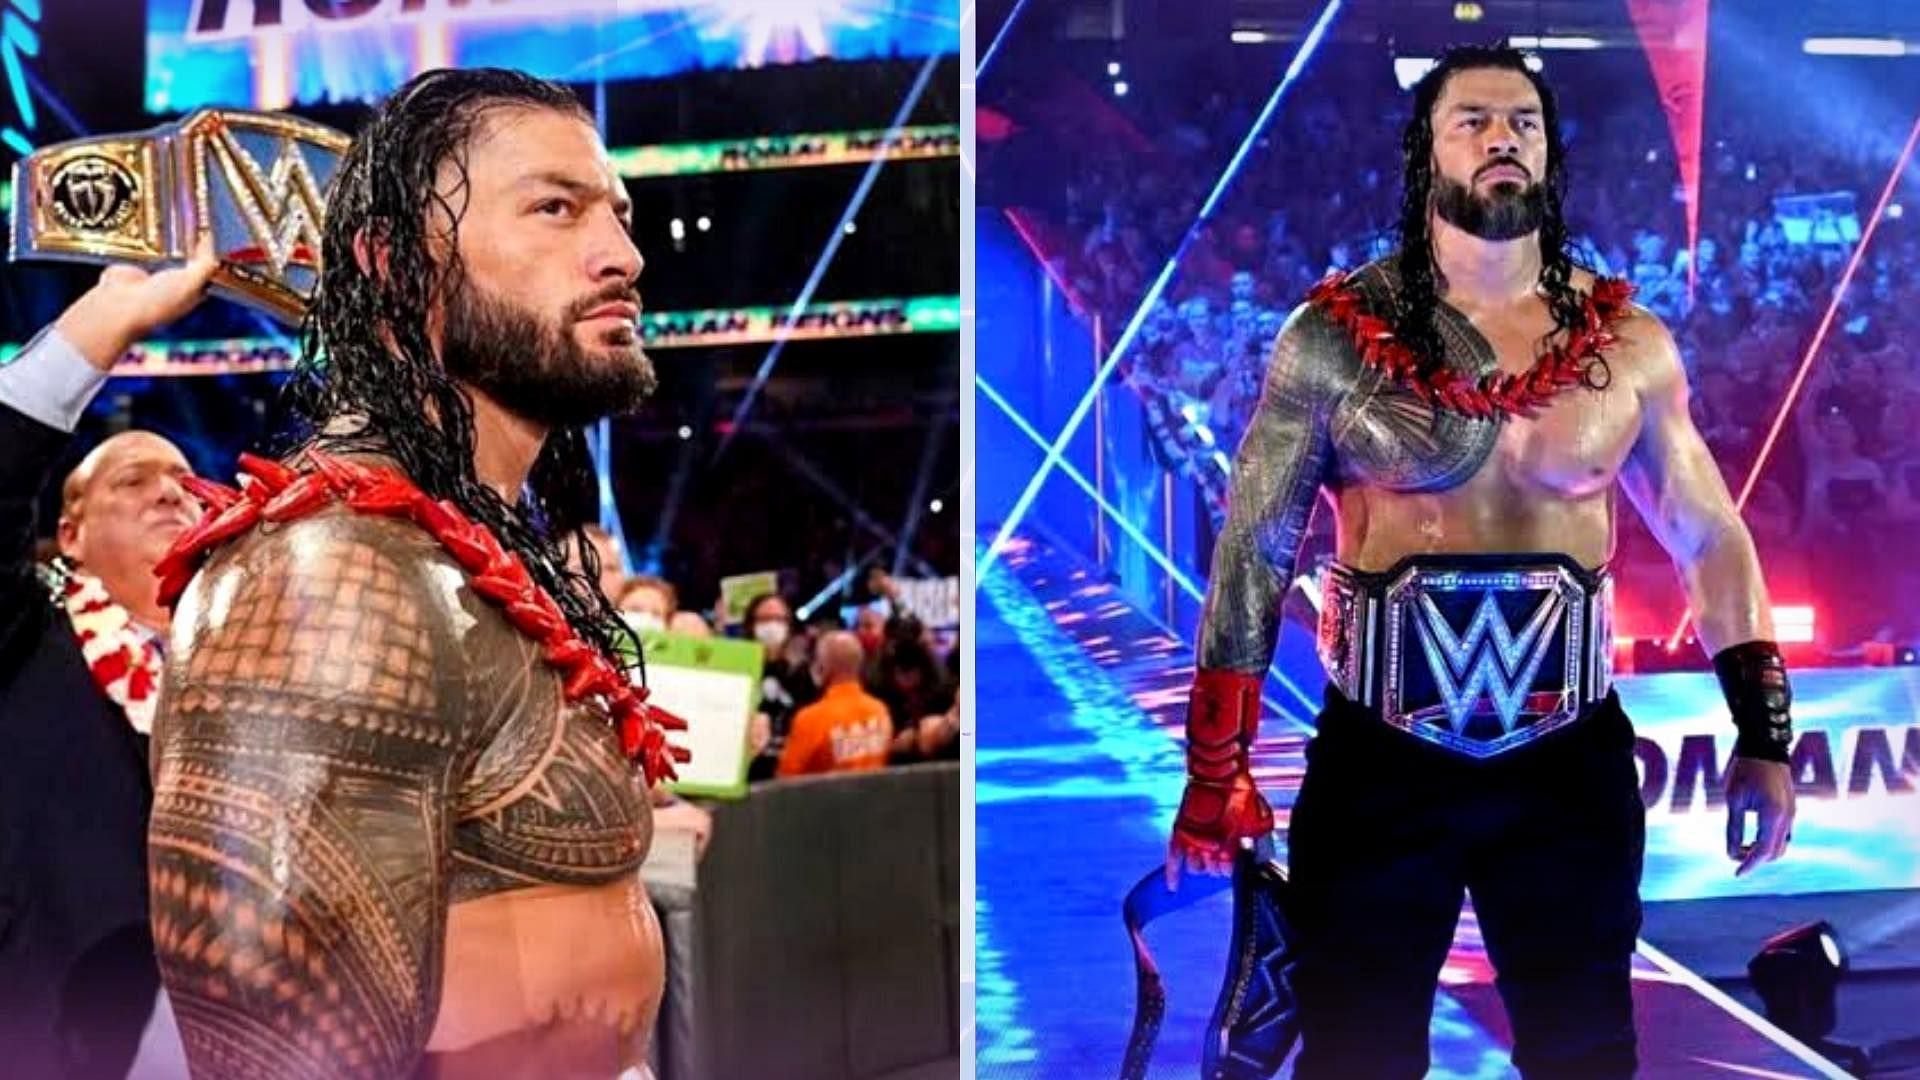 Roman Reigns is the leader of WWE